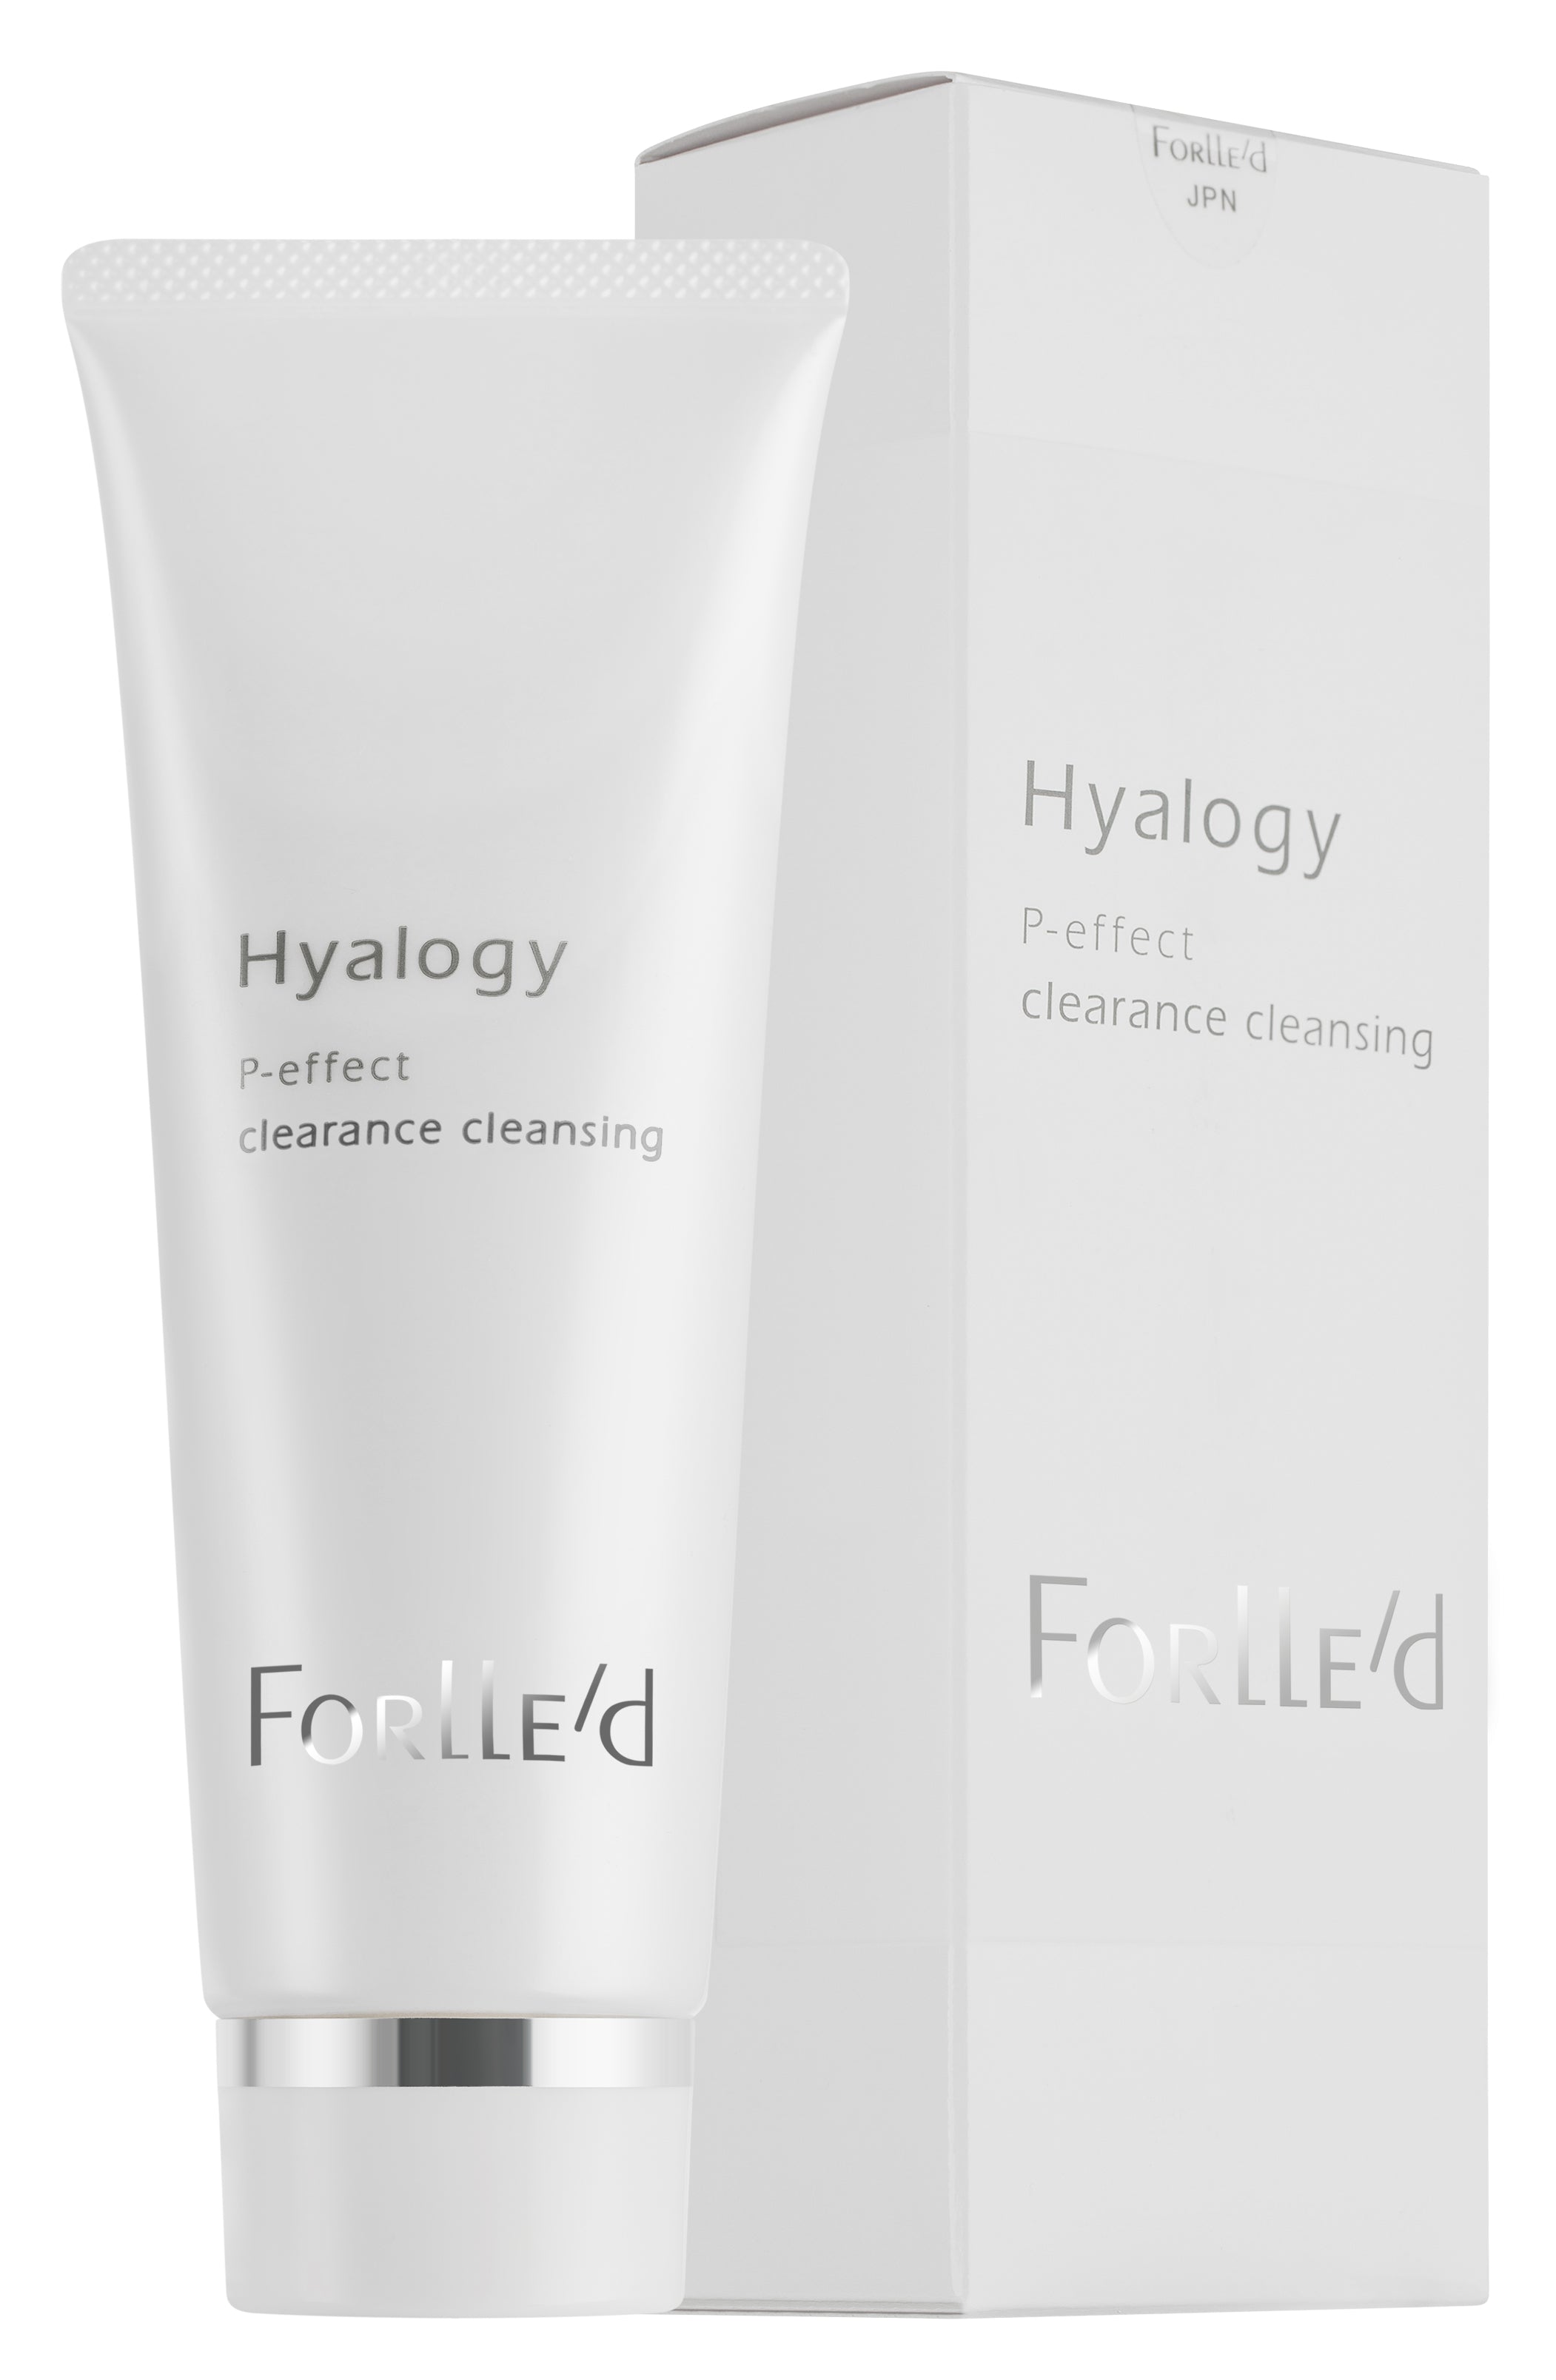 Forlle'd Hyalogy P-effect Clearance Cleansing (125ml)